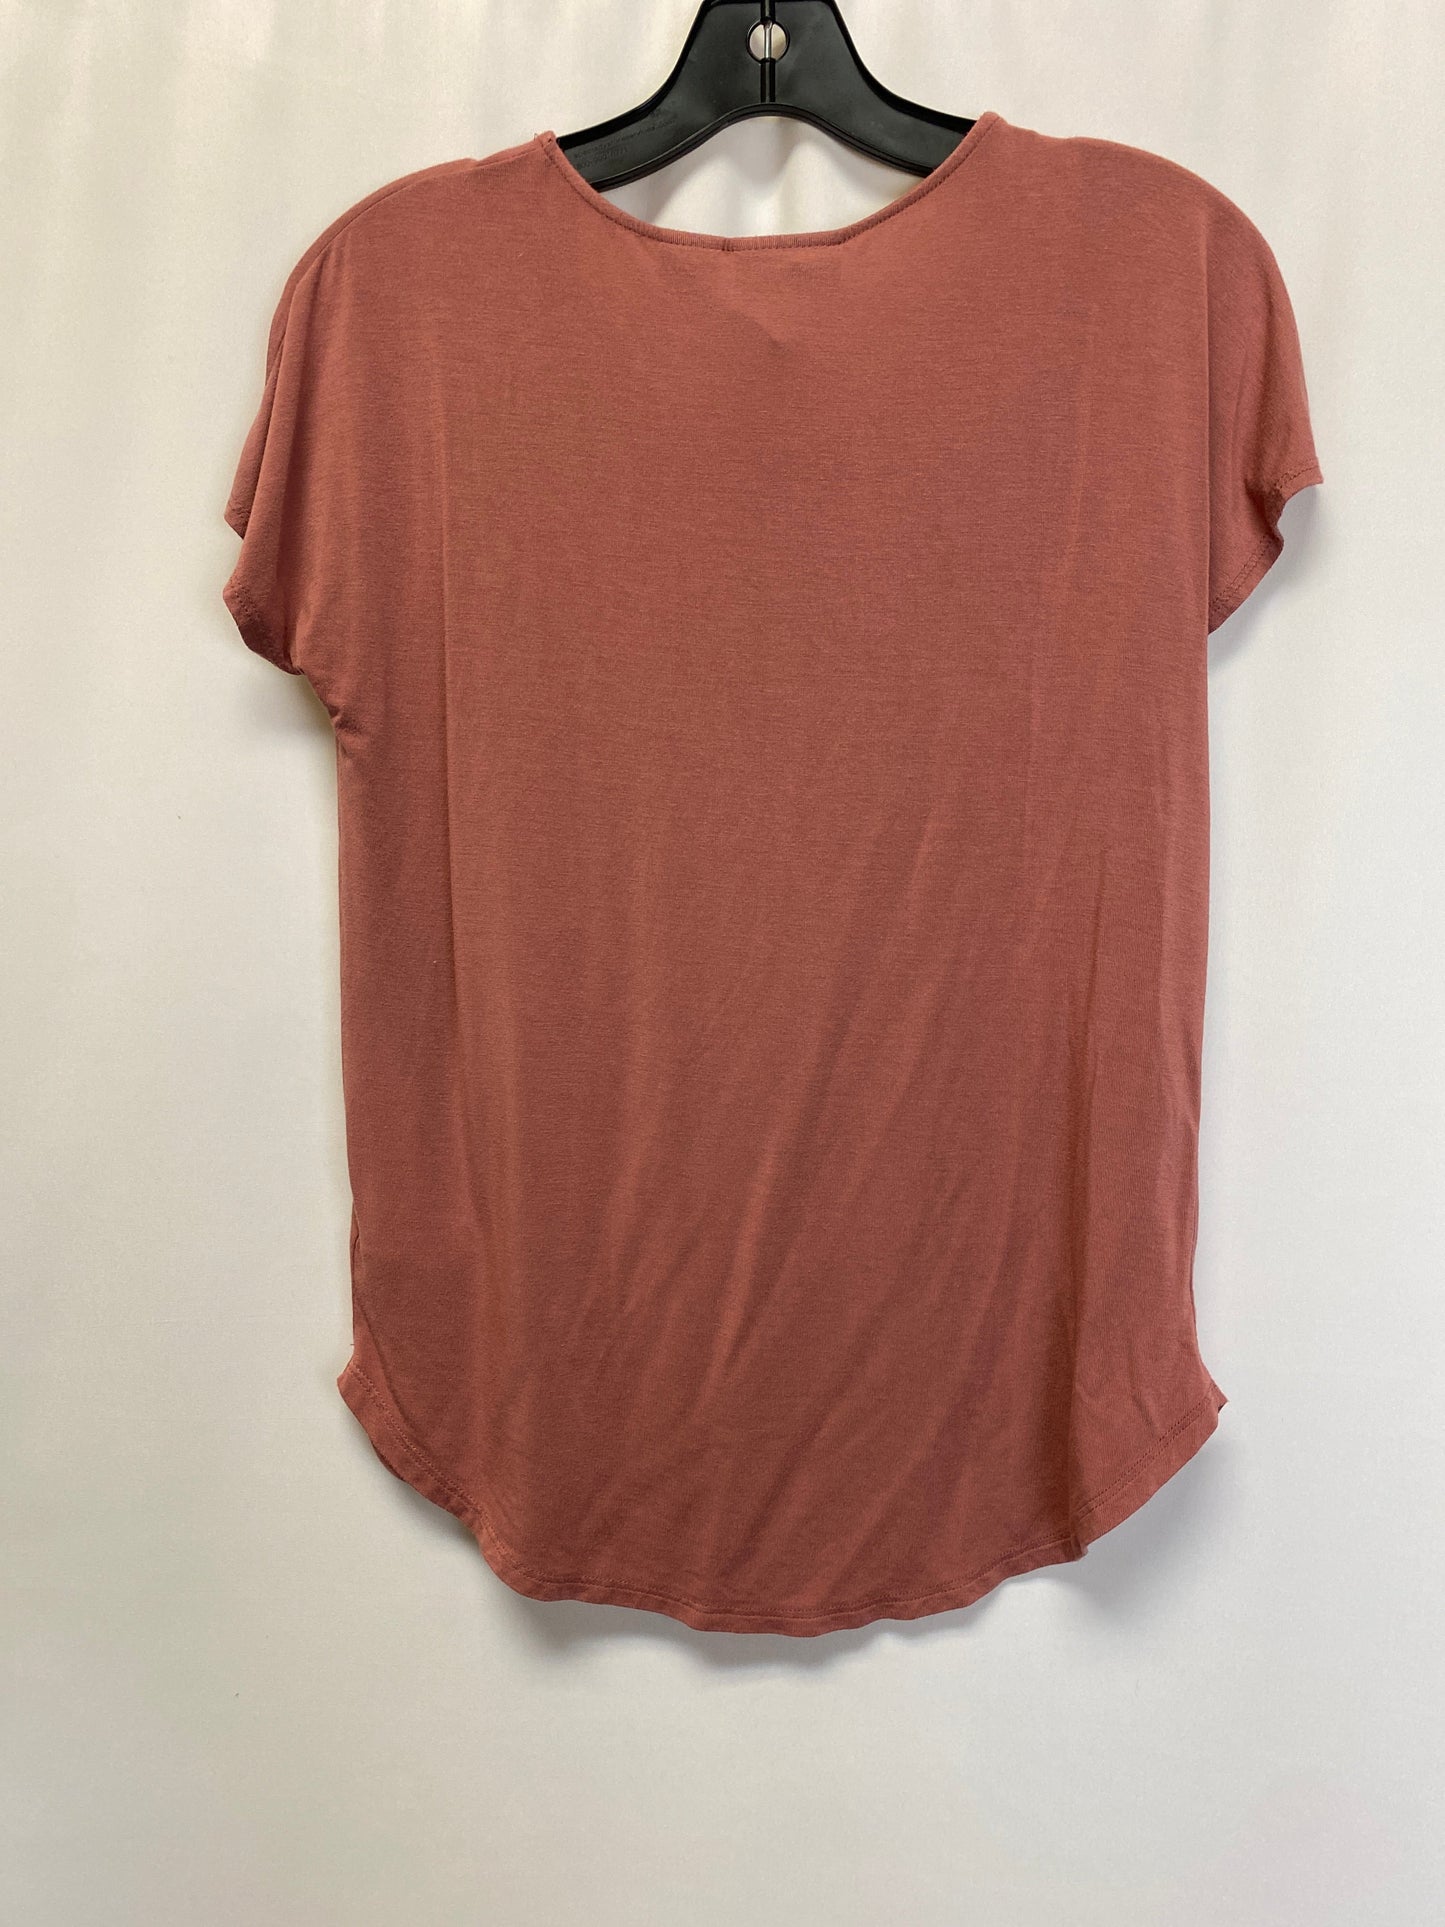 Top Short Sleeve By Adrienne Vittadini  Size: Xs